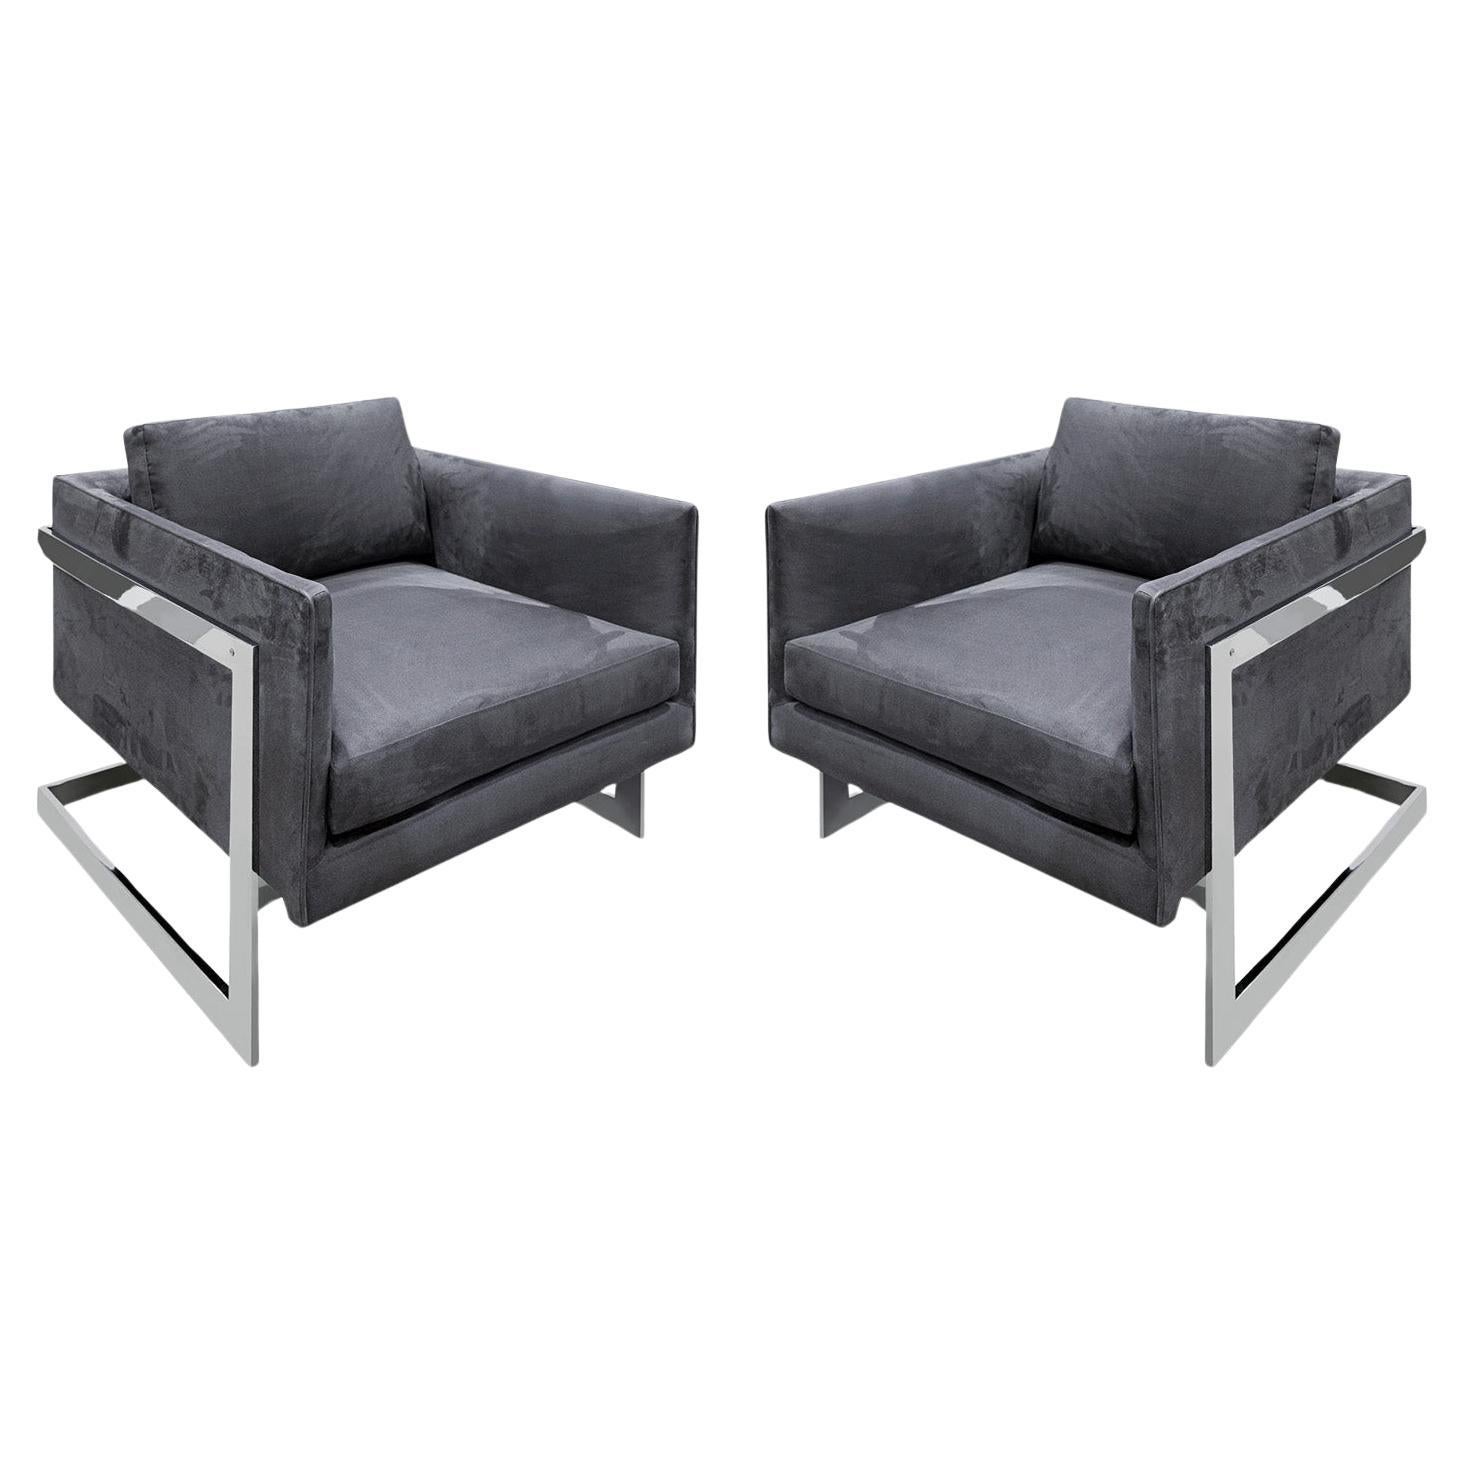 Milo Baughman Pair of Lounge Chairs with Polished Chrome Frames 1970s